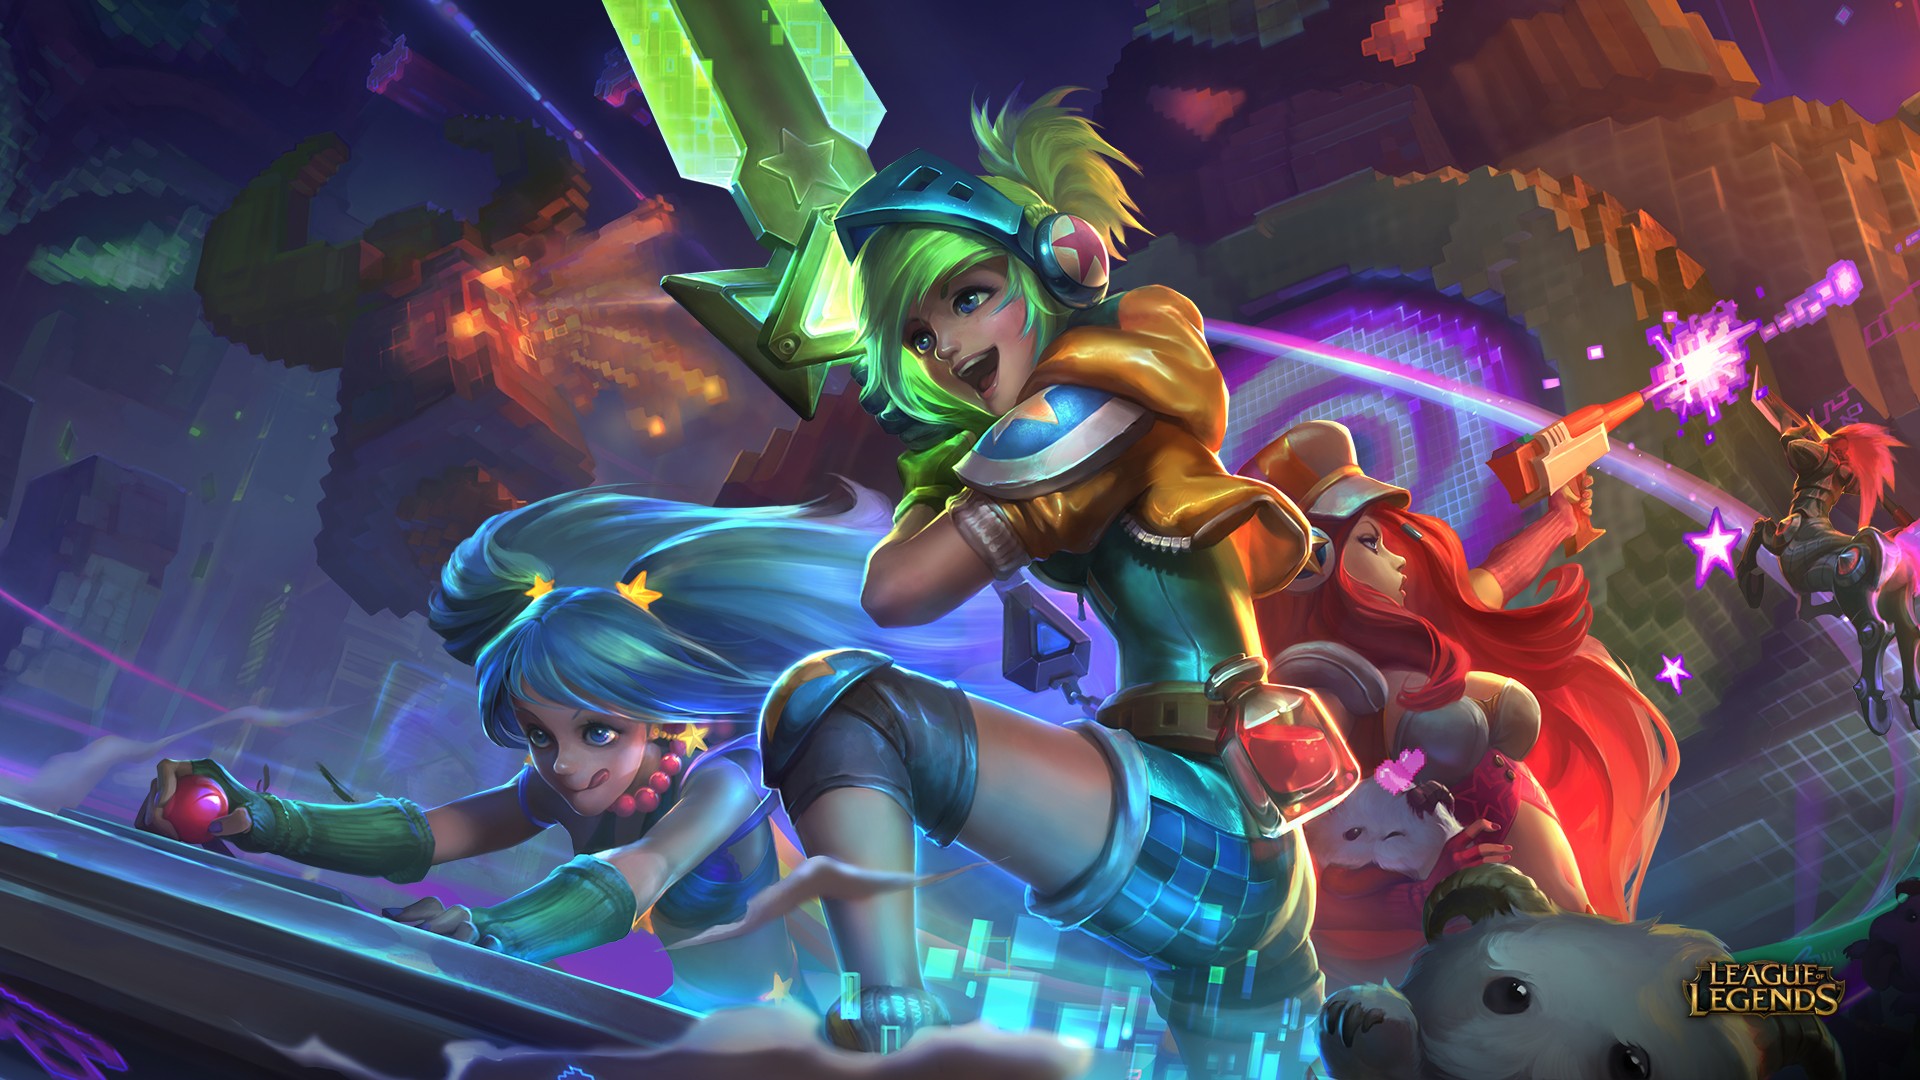 General 1920x1080 League of Legends arcade  Miss Fortune (League of Legends) Sona (League of Legends) Blitzcrank (League of Legends) Riven (League of Legends) PC gaming women trio video game girls video game characters